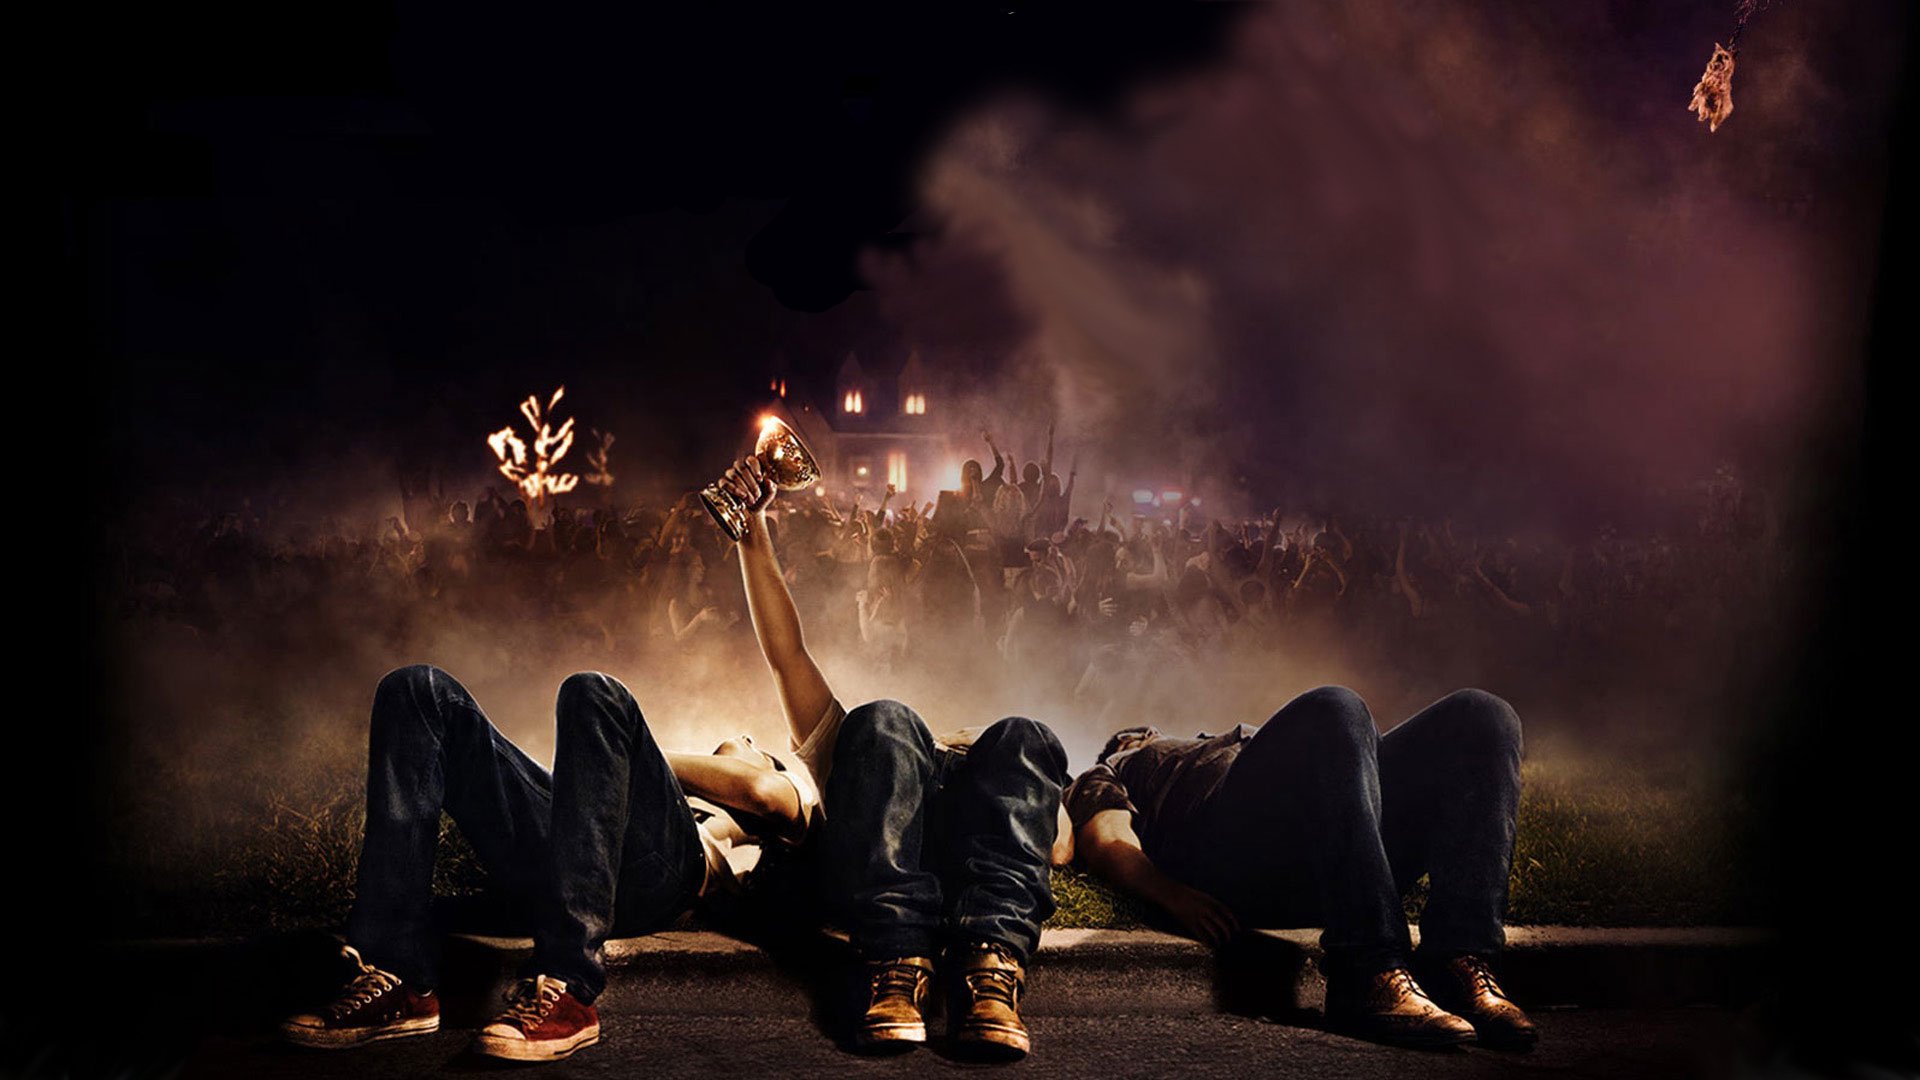 project x 2012 movie online free